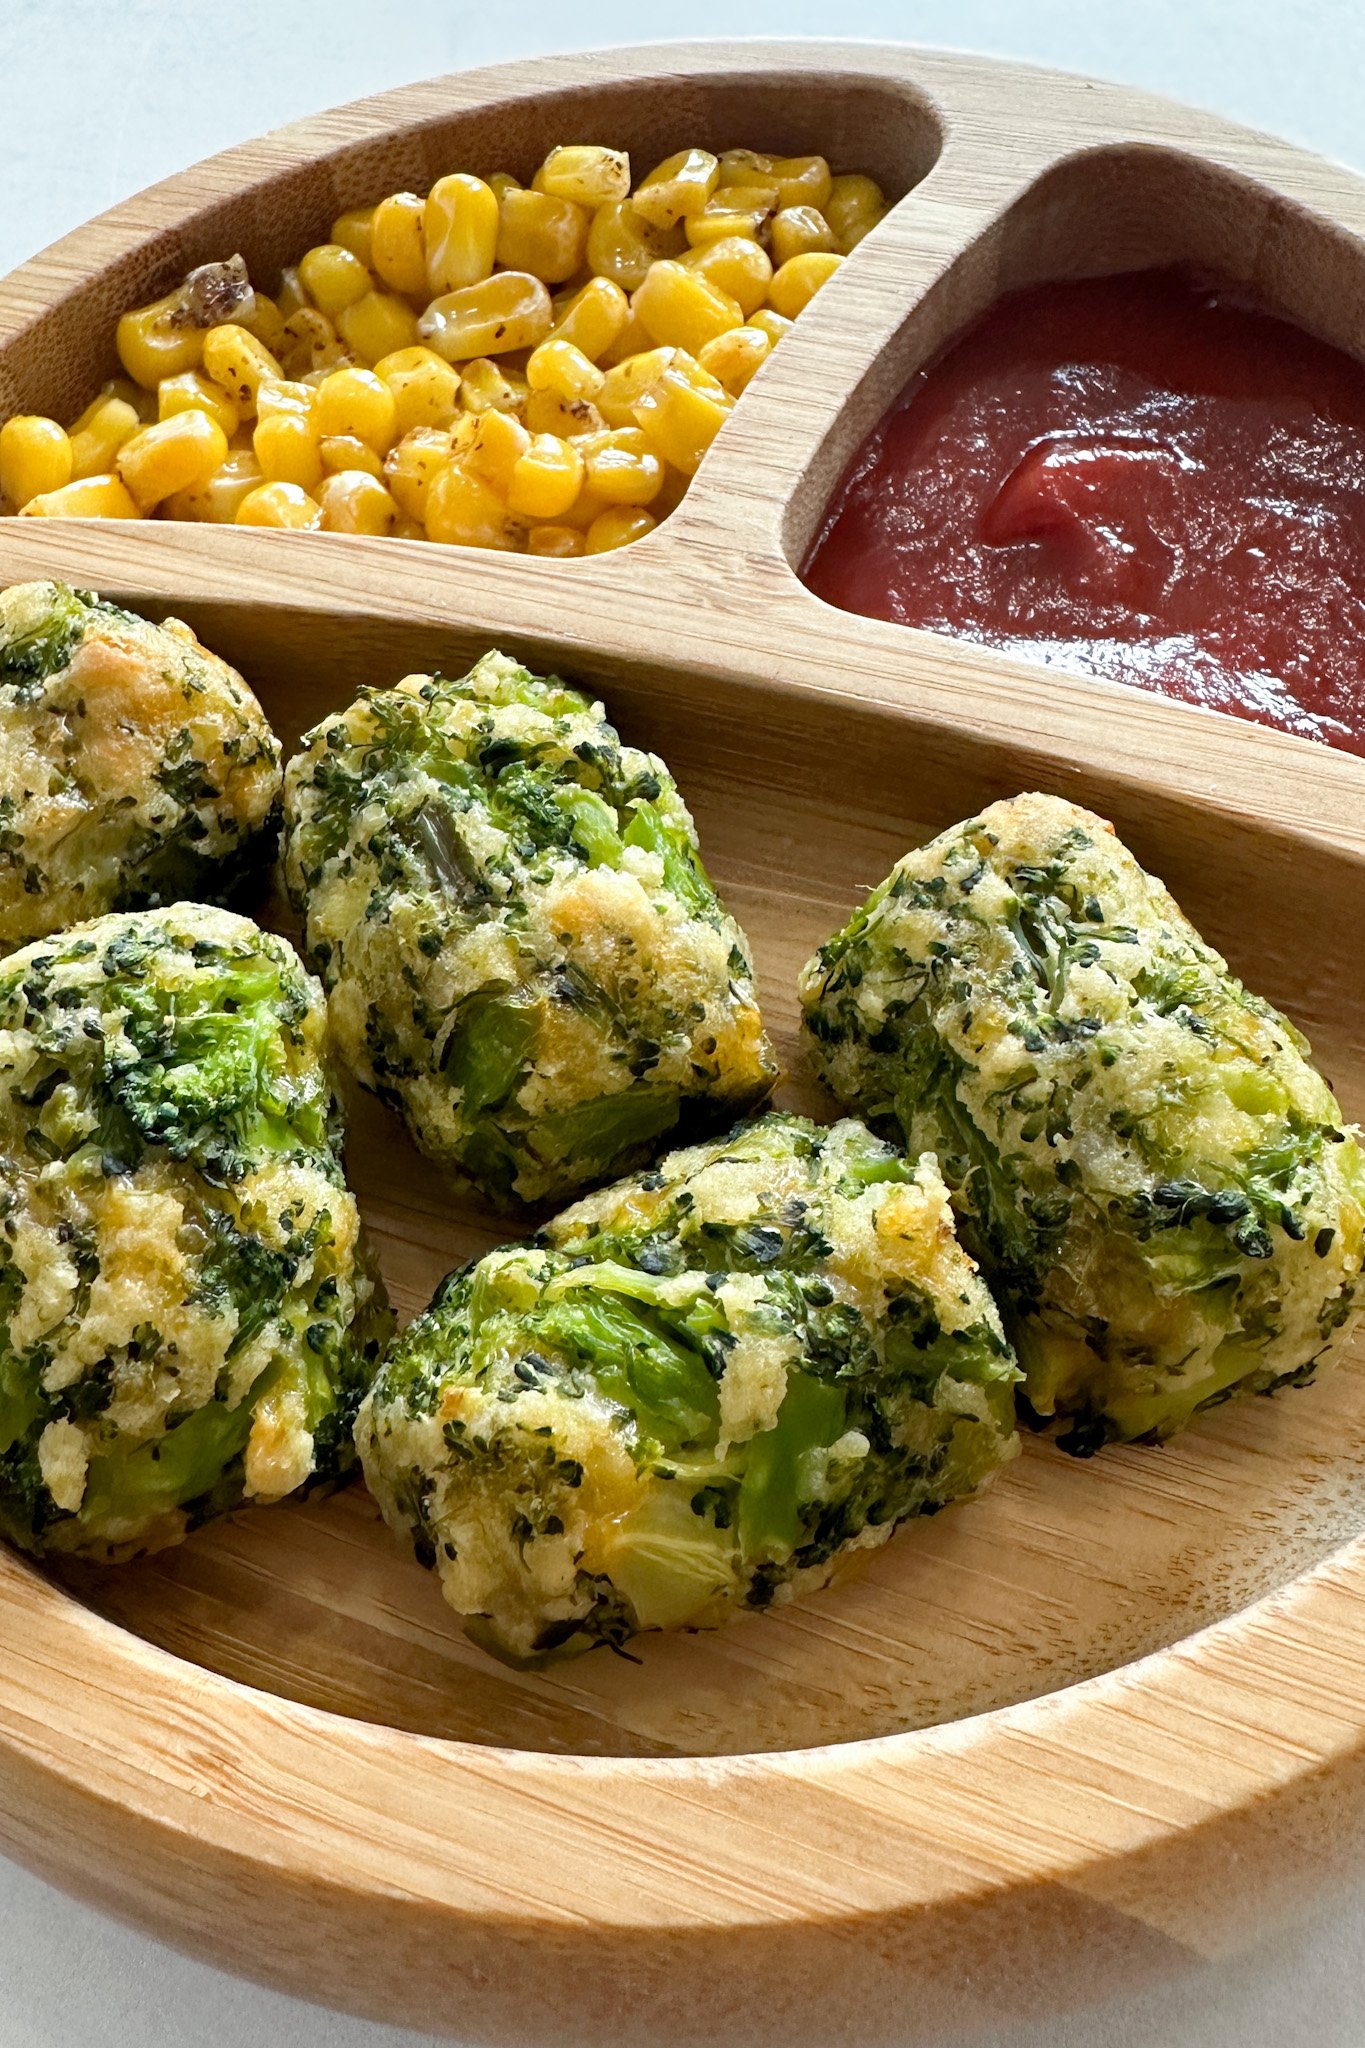 Broccoli tots served with corn and ketchup.